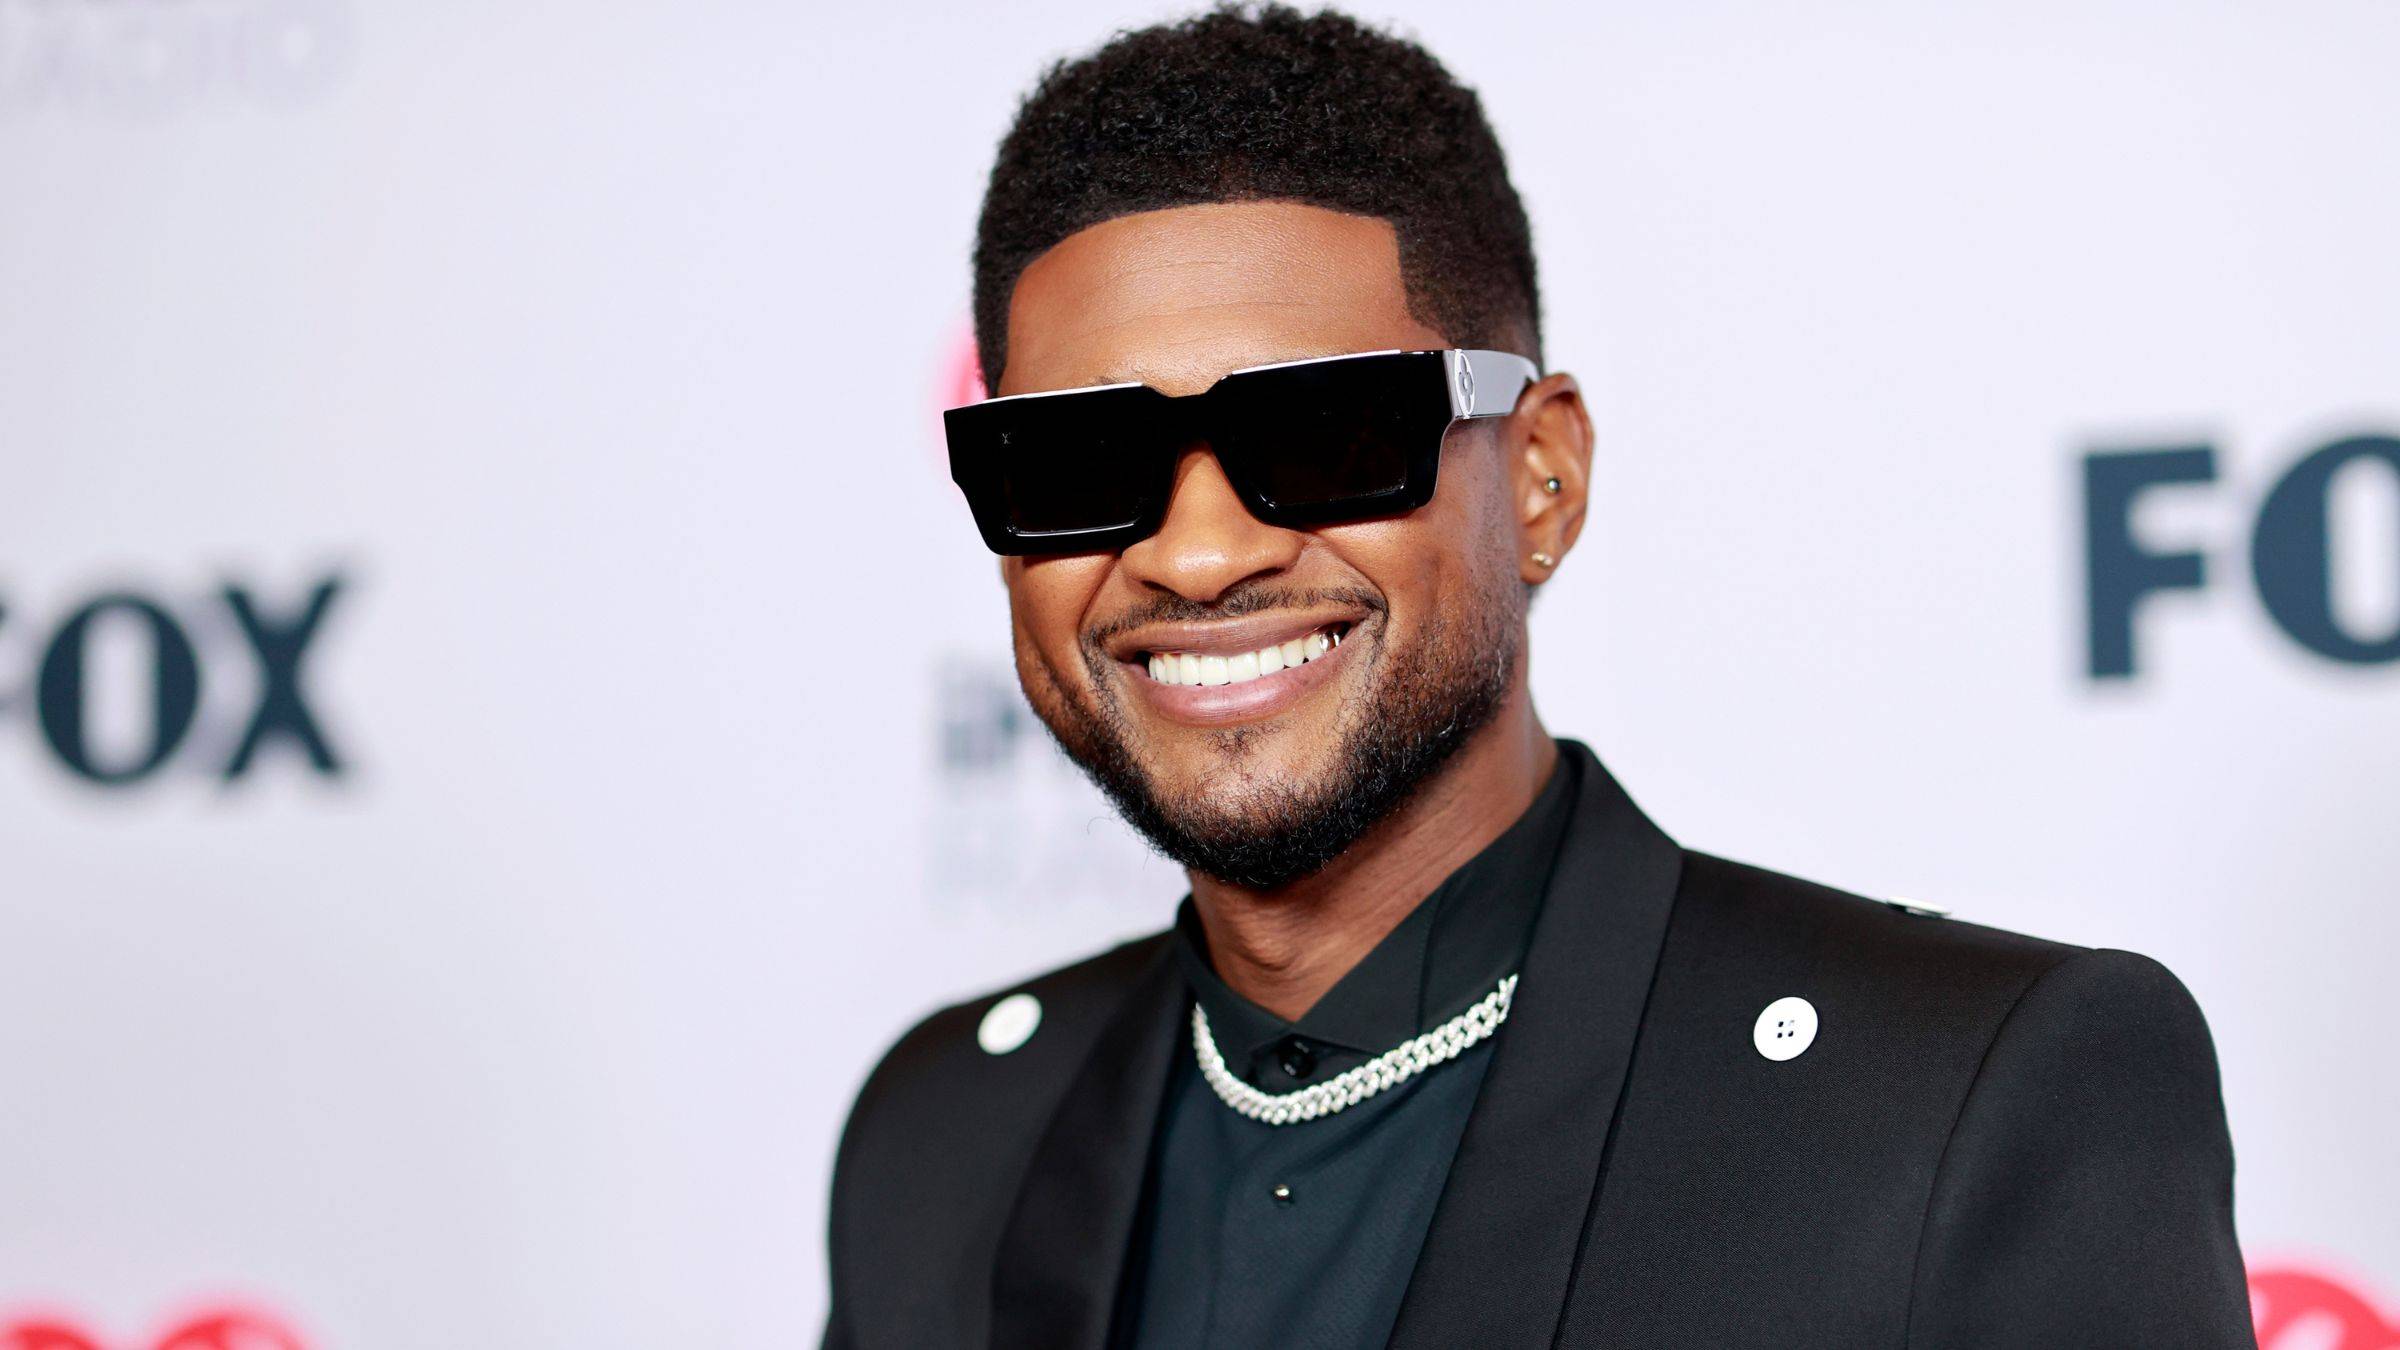 Usher strips for new Skims photos ahead of Super Bowl halftime